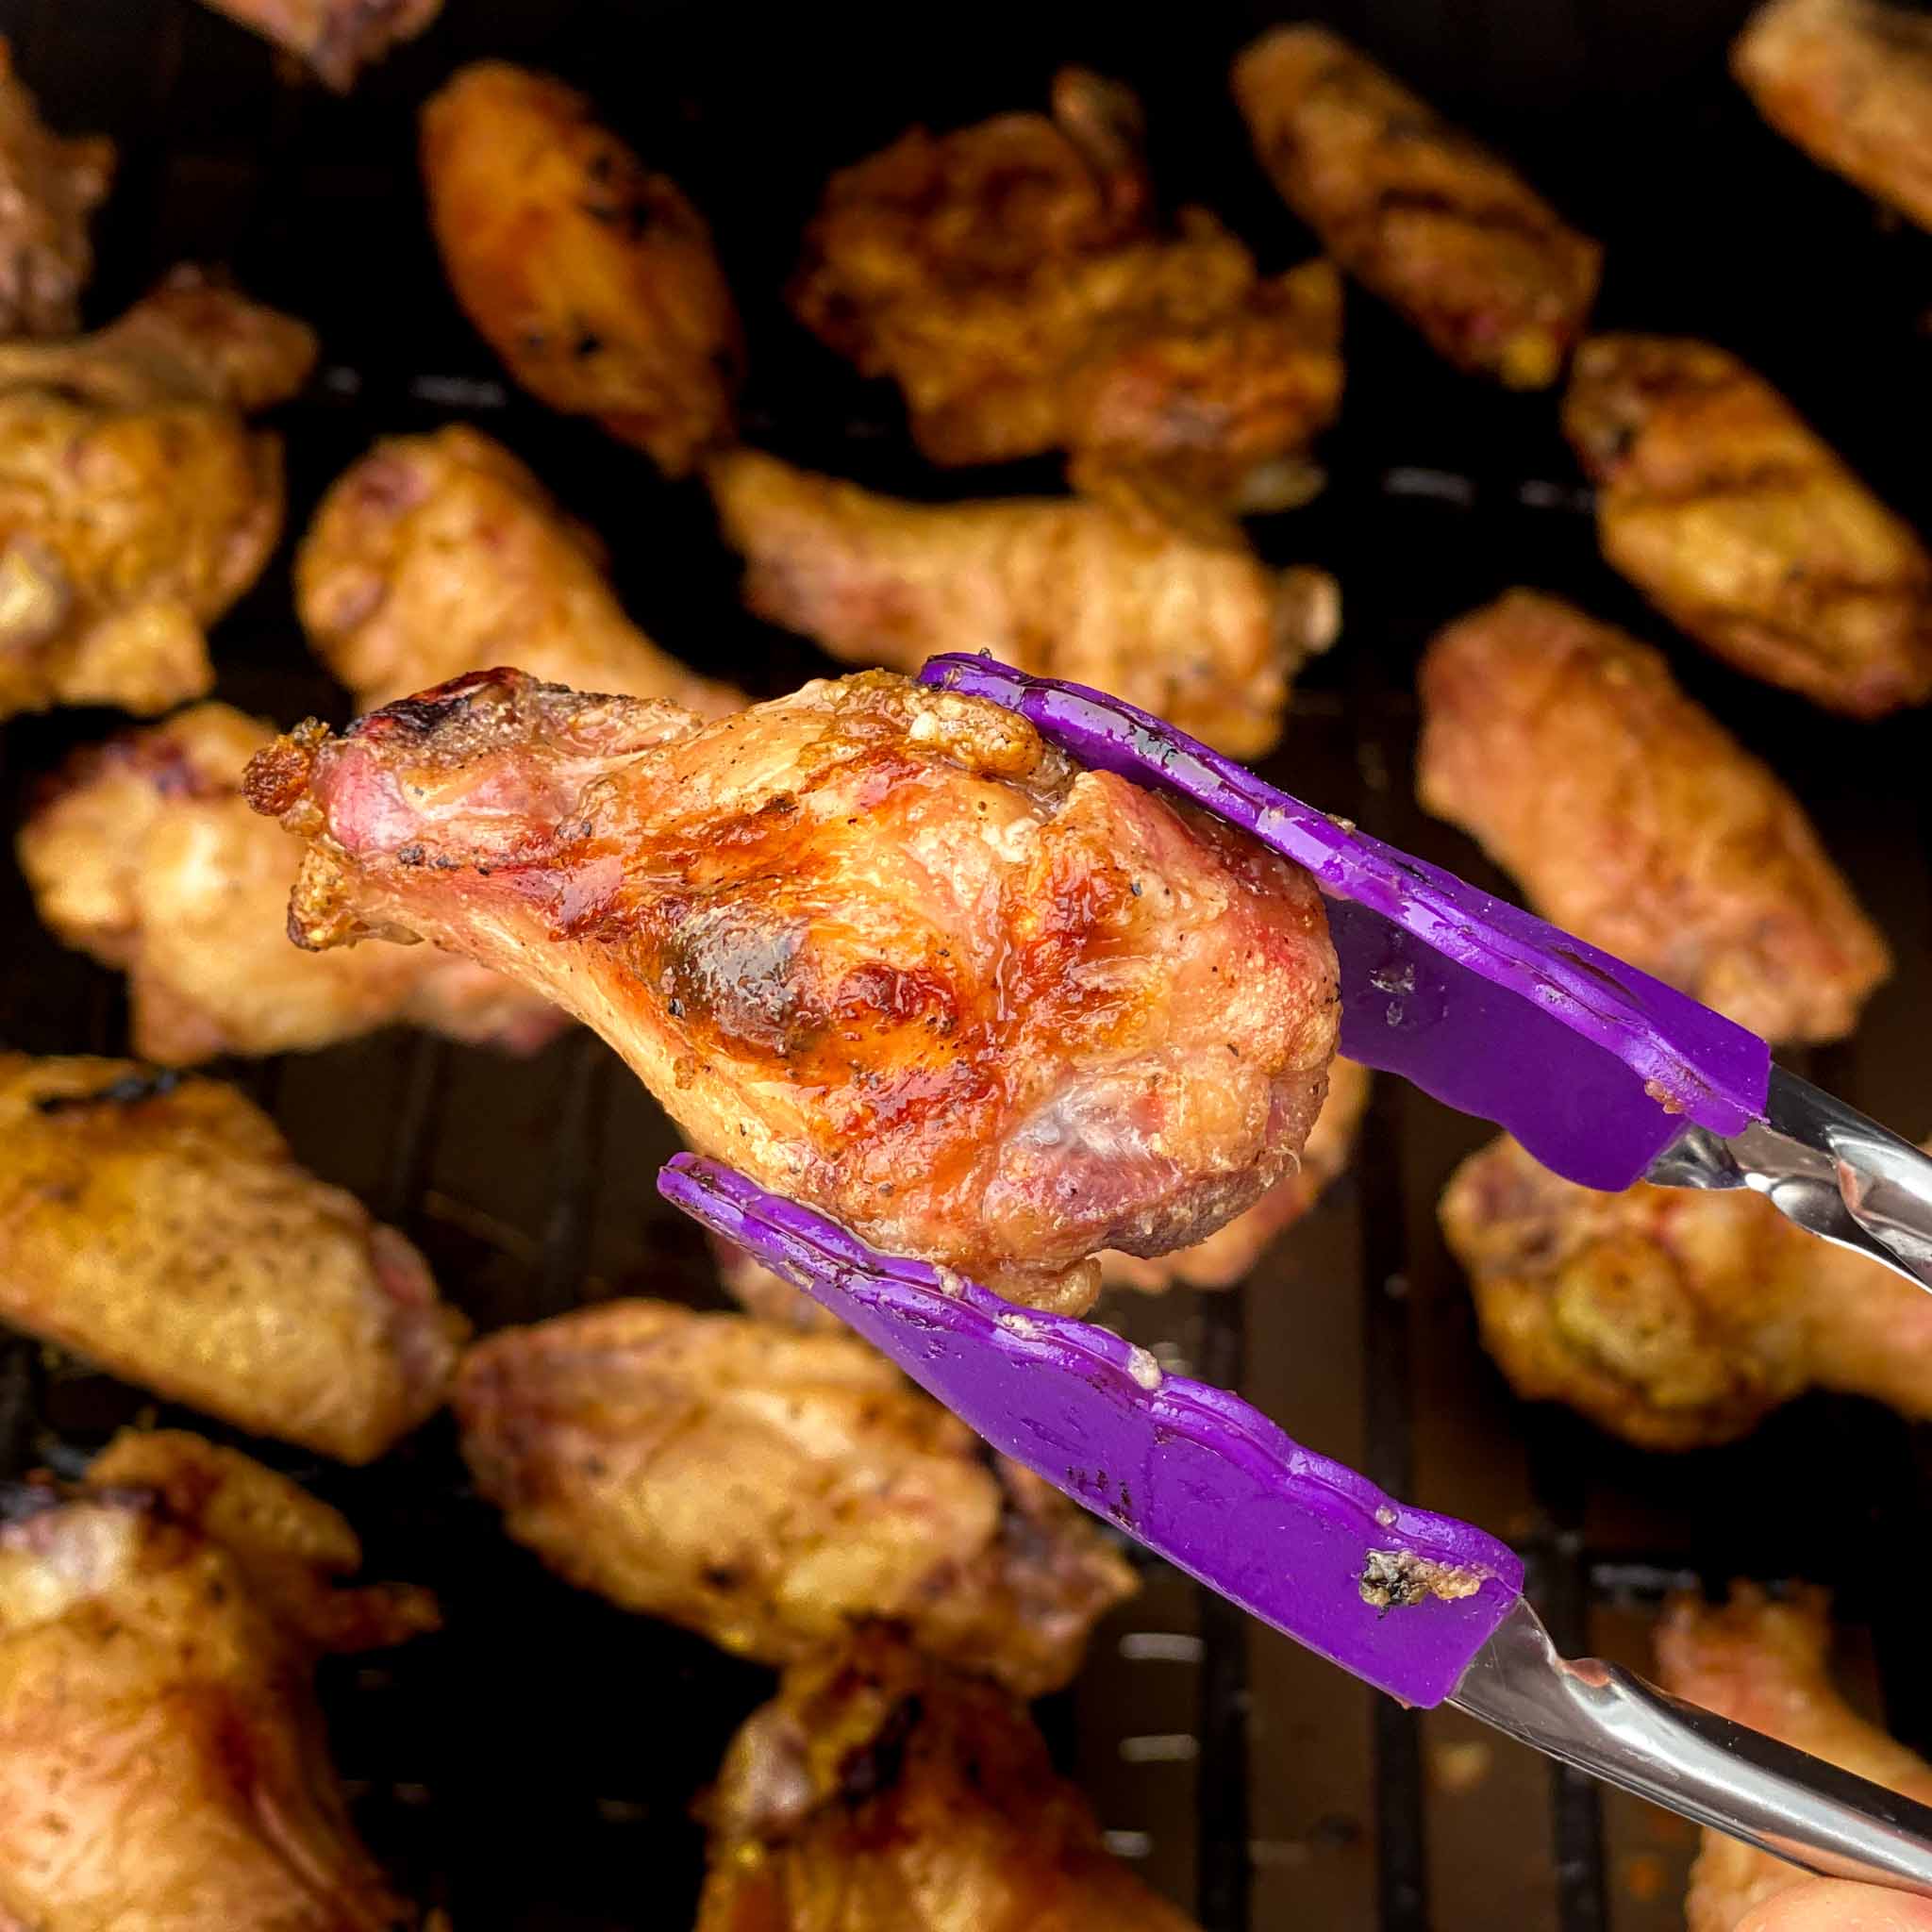 A brined chicken wing with crispy skin being held up over a pellet grill.